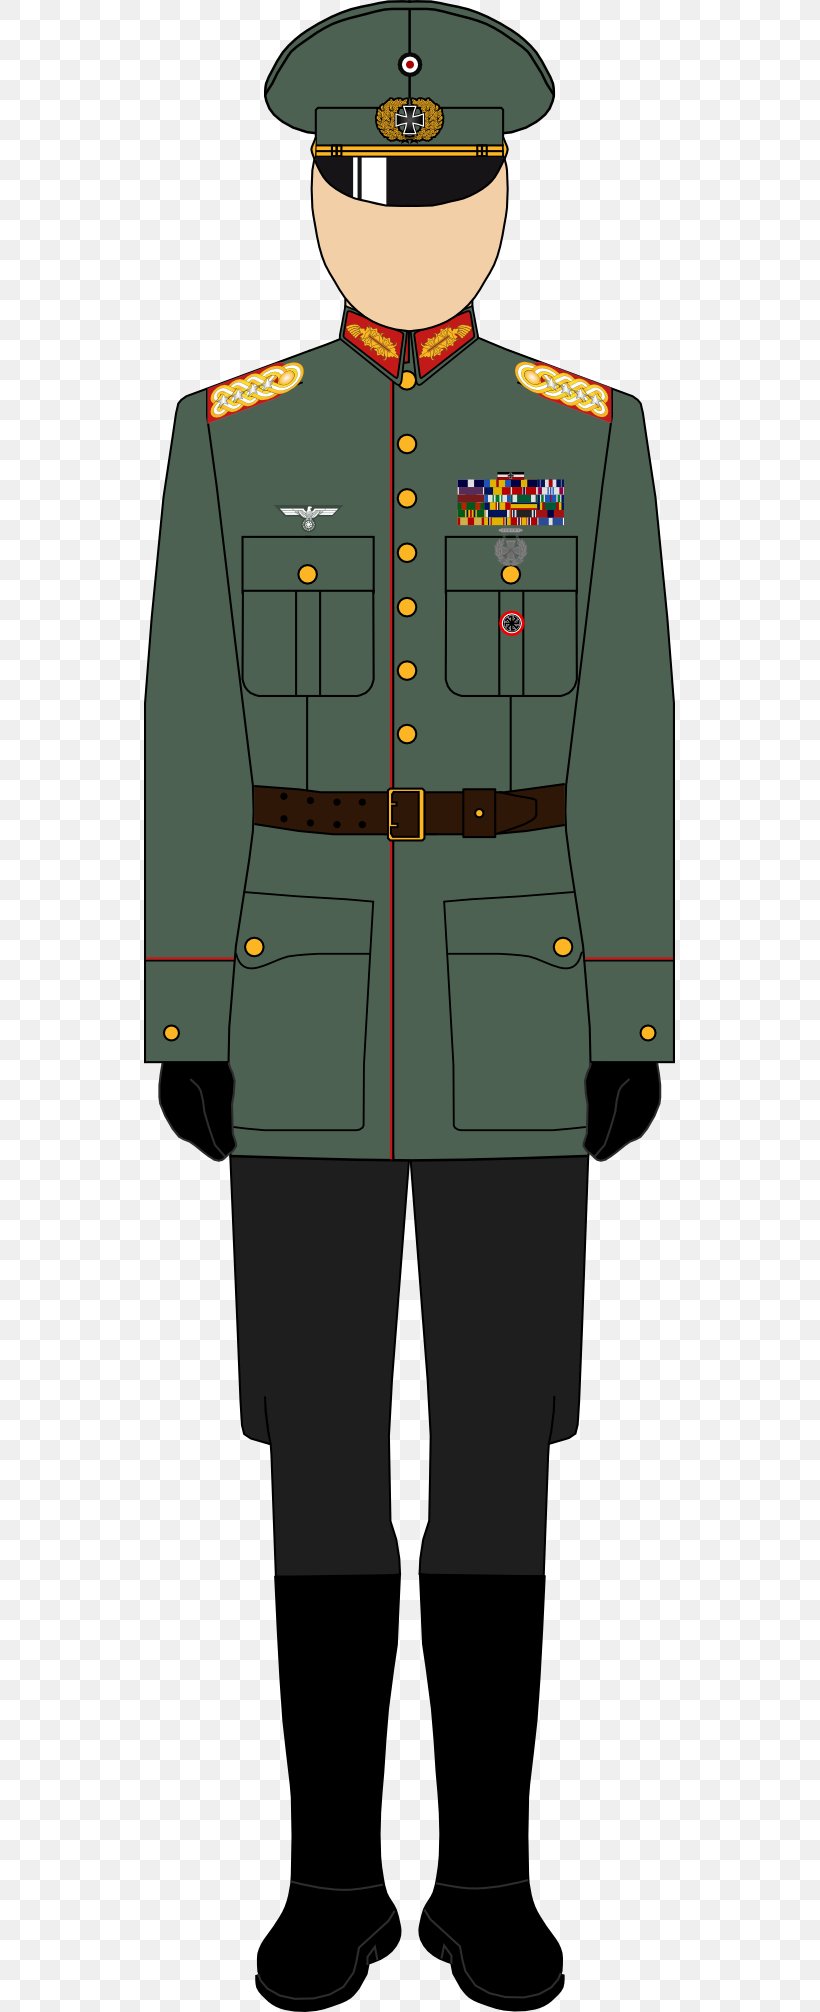 Military Uniform Army Officer Dress Uniform General, PNG, 531x2012px, Military Uniform, Admiral, Army, Army Officer, Army Service Uniform Download Free